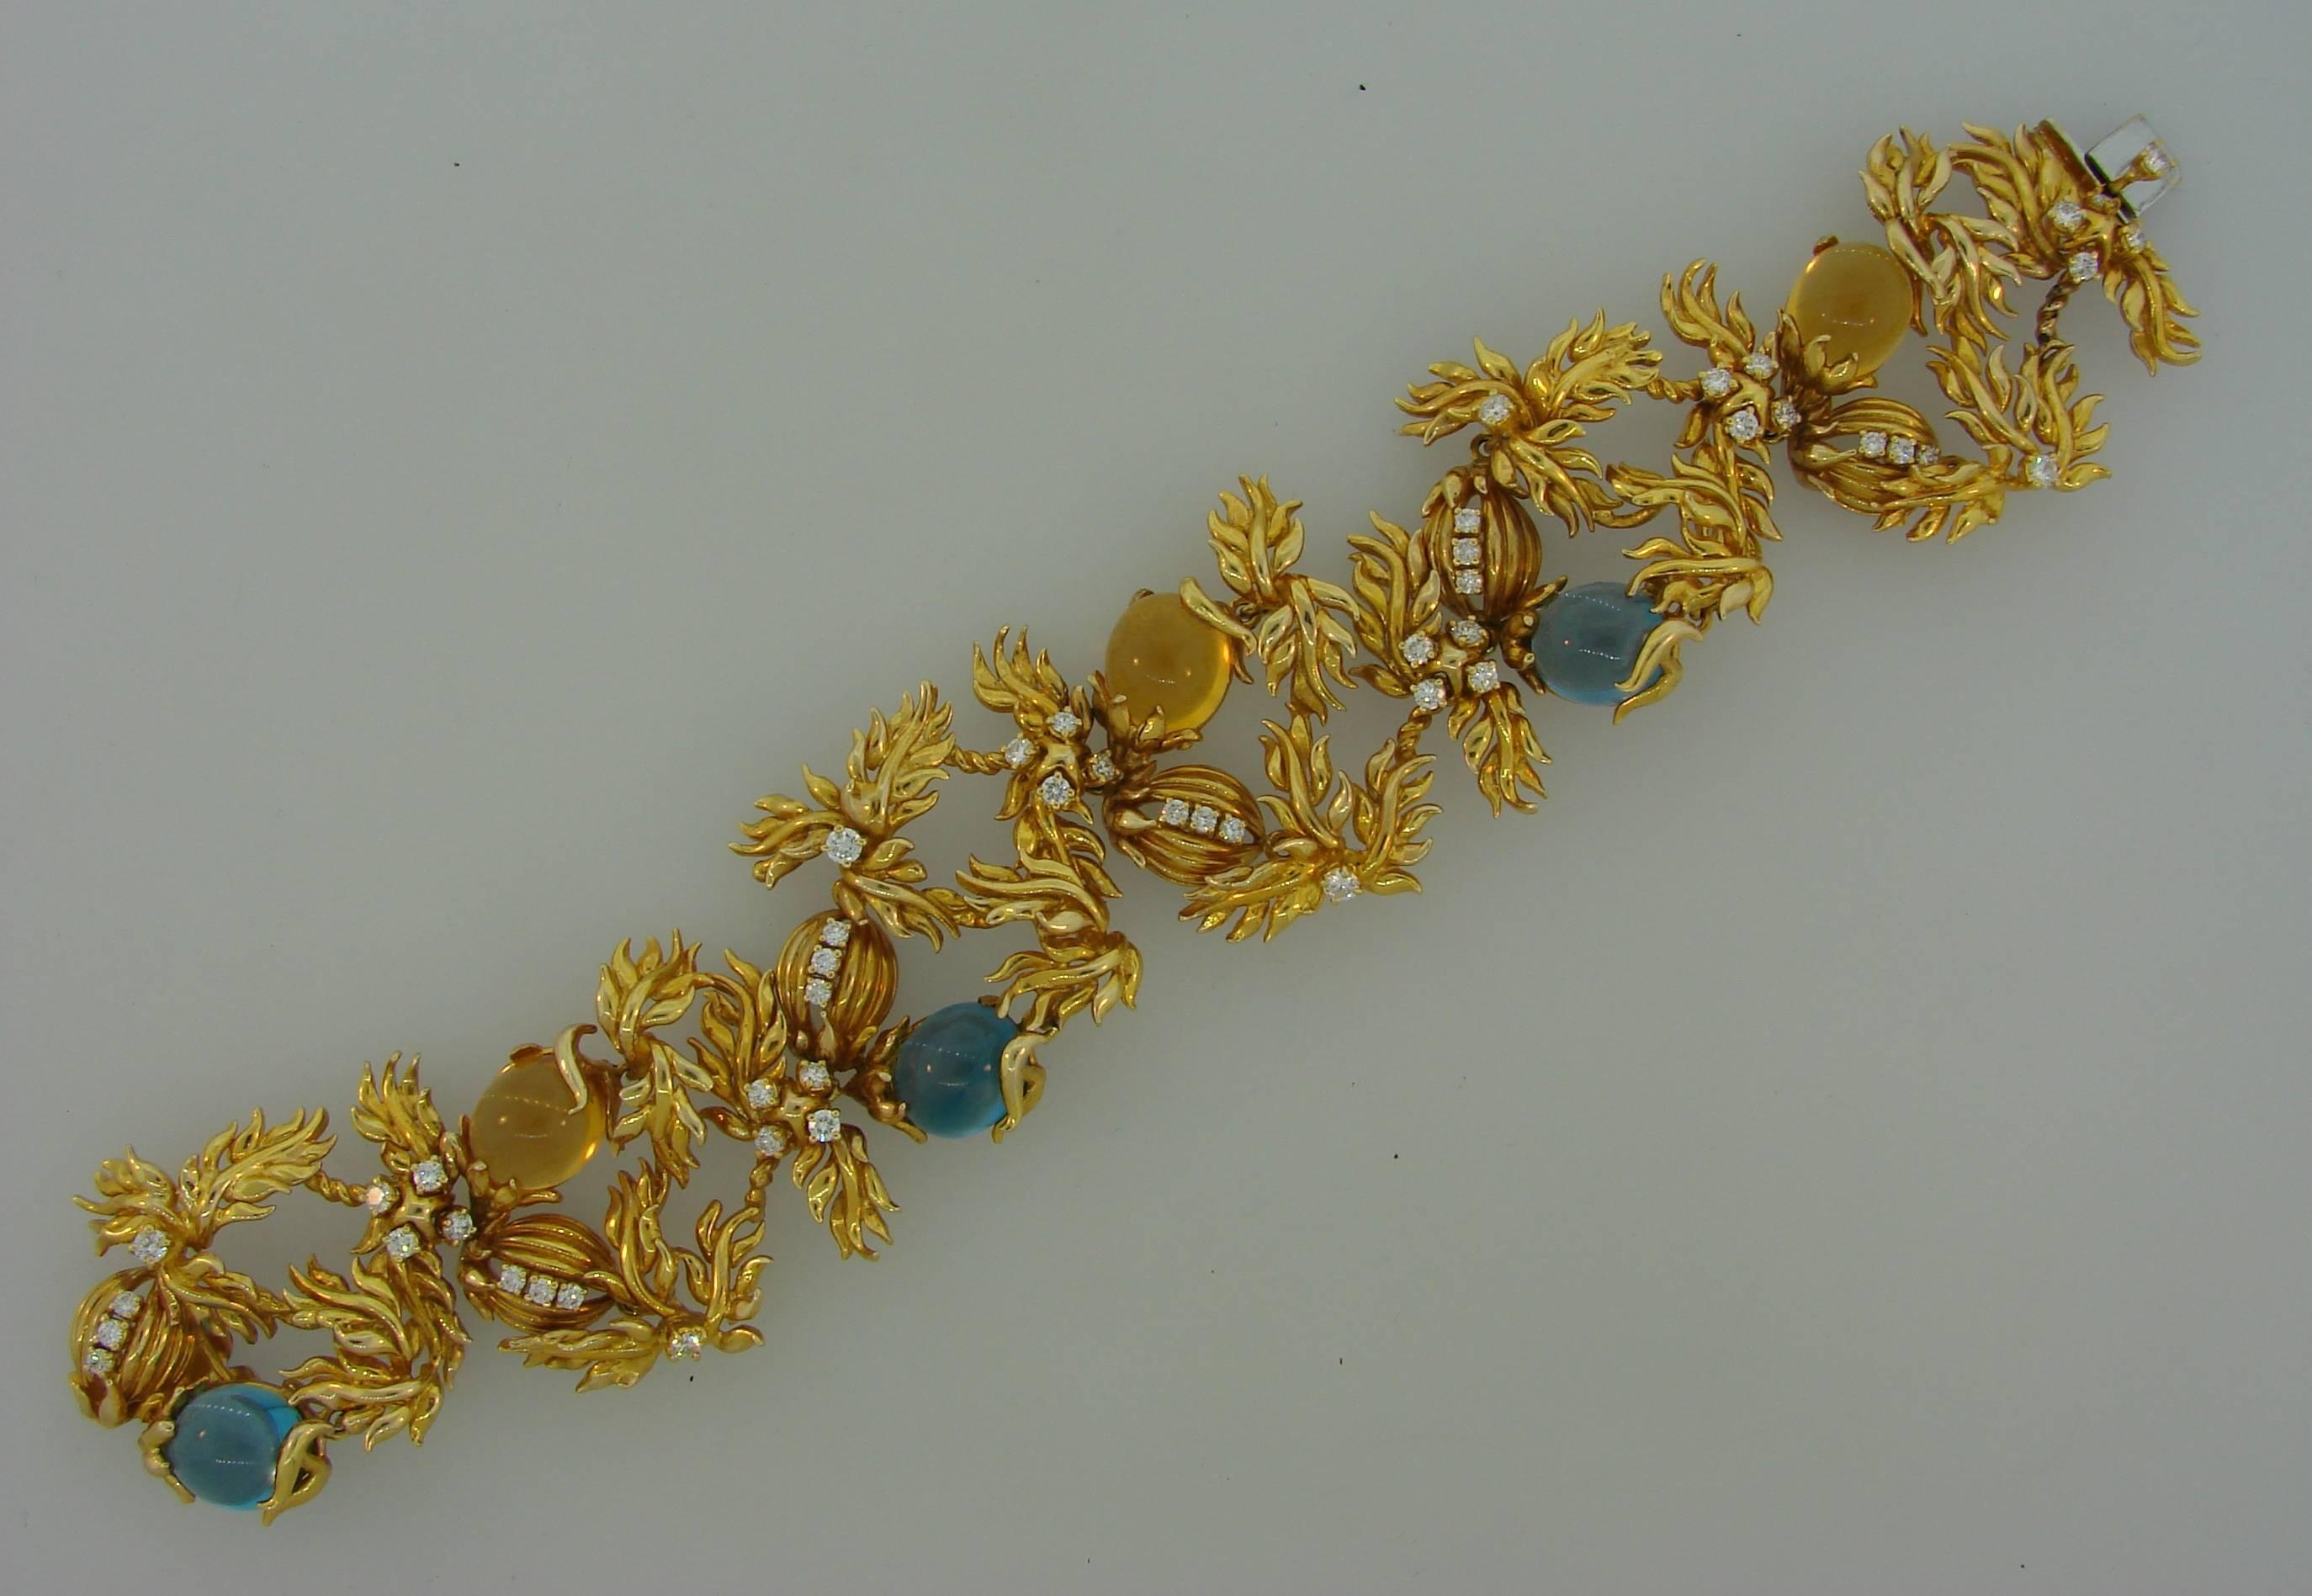 Beautiful whimsical bracelet created by Aldo Cipullo for Cartier in the 1980s. Inspired by nature's floral motifs, the bracelet is made of 18 karat yellow gold and set with oval cabochon topaz, citrine and round brilliant cut diamonds. Diamond total